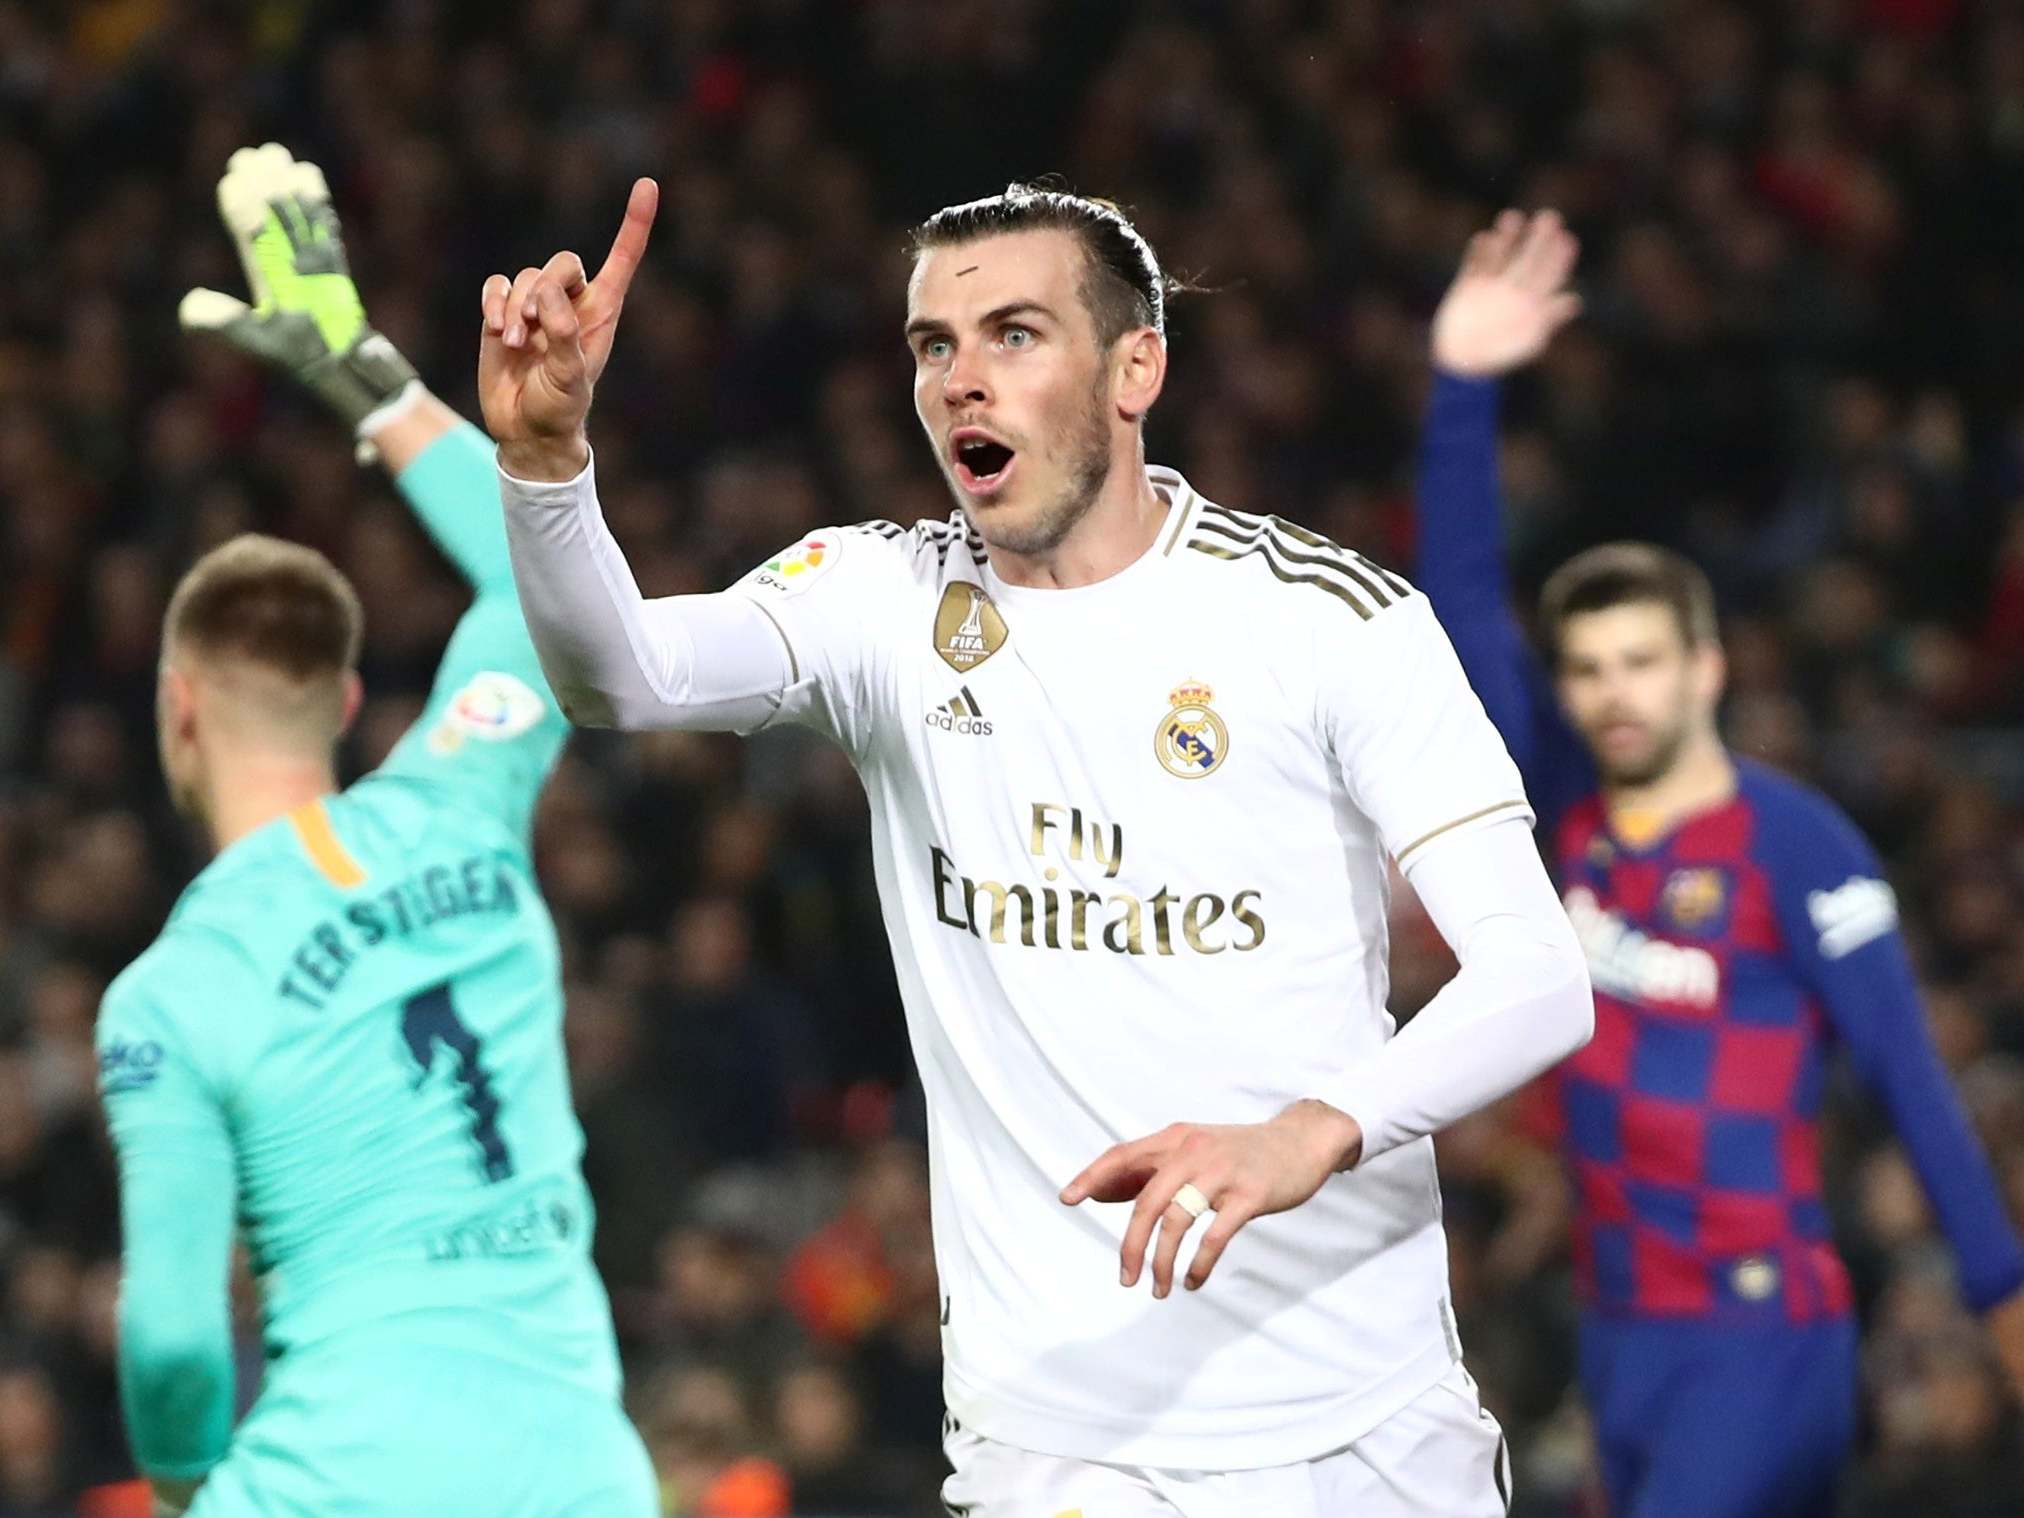 Gareth Bale's disallowed goal left the Clasico goalless for the first time since 2002